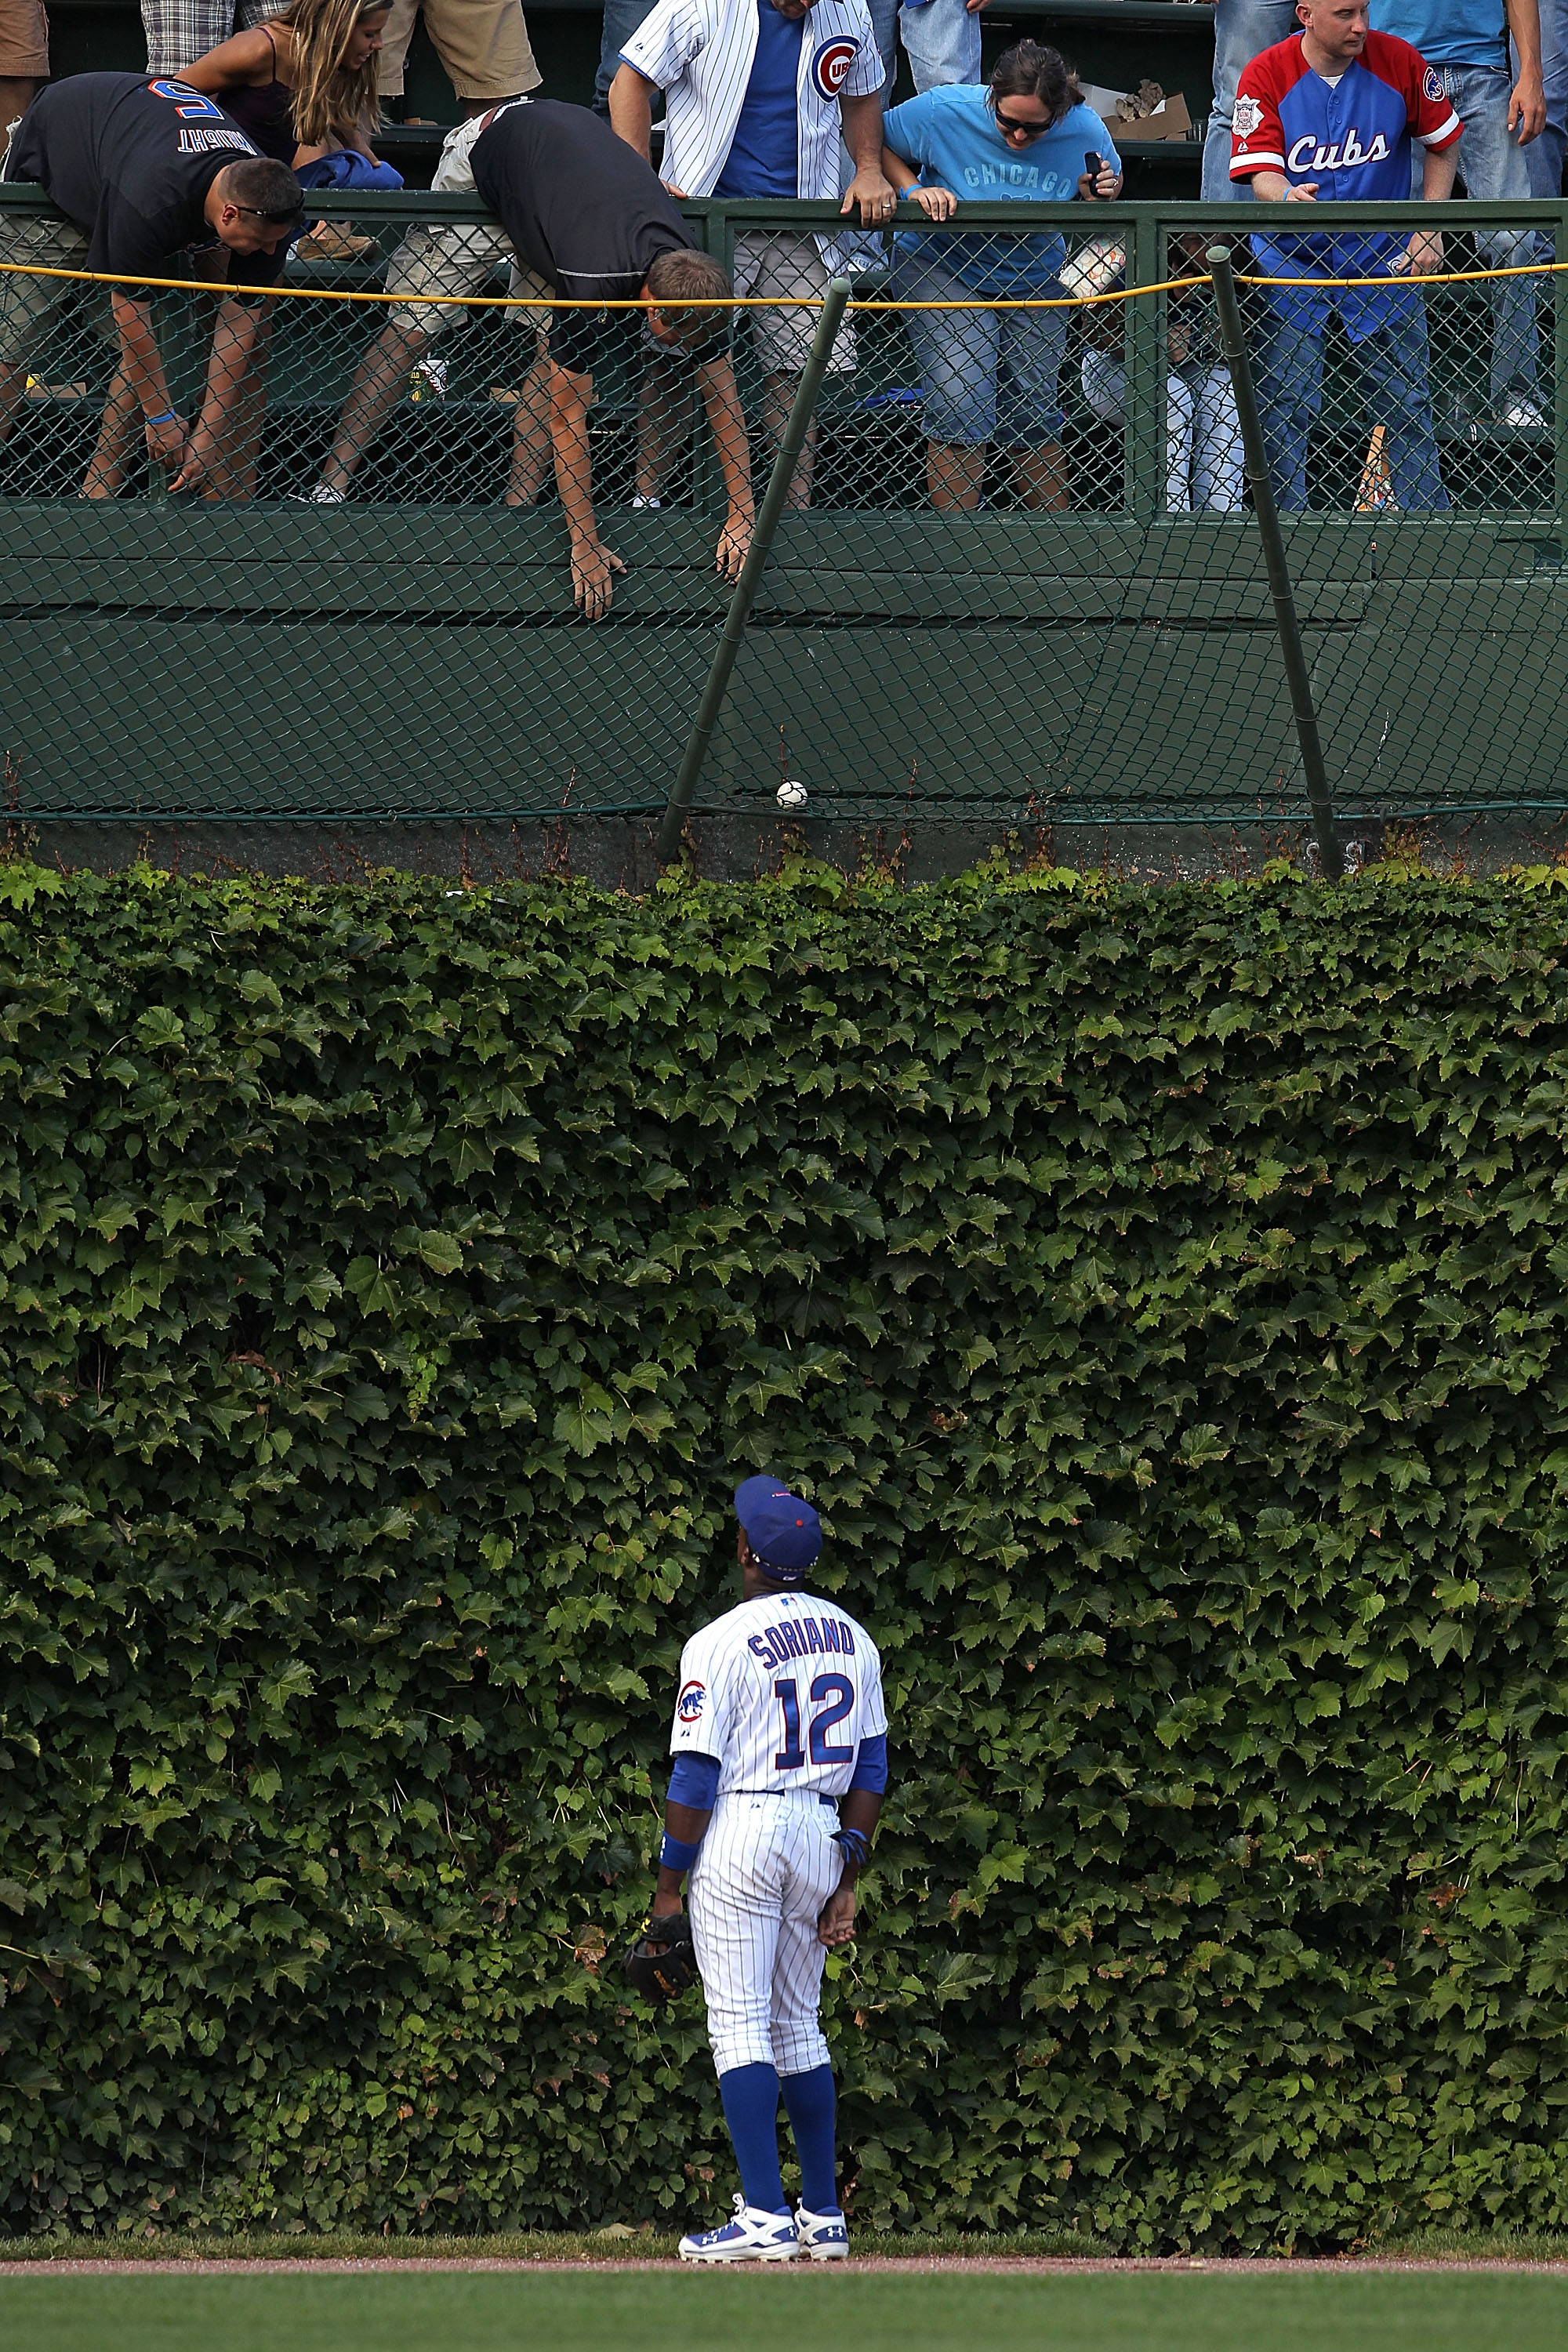 CHICAGO - SEPTEMBER 05: Alfonso Soriano #12 of the Chicago Cubs watches as fans try to grab a home run ball hit by Ike Davis of the New York Mets out of the basket in left field at Wrigley Field on September 5, 2010 in Chicago, Illinois. (Photo by Jonatha